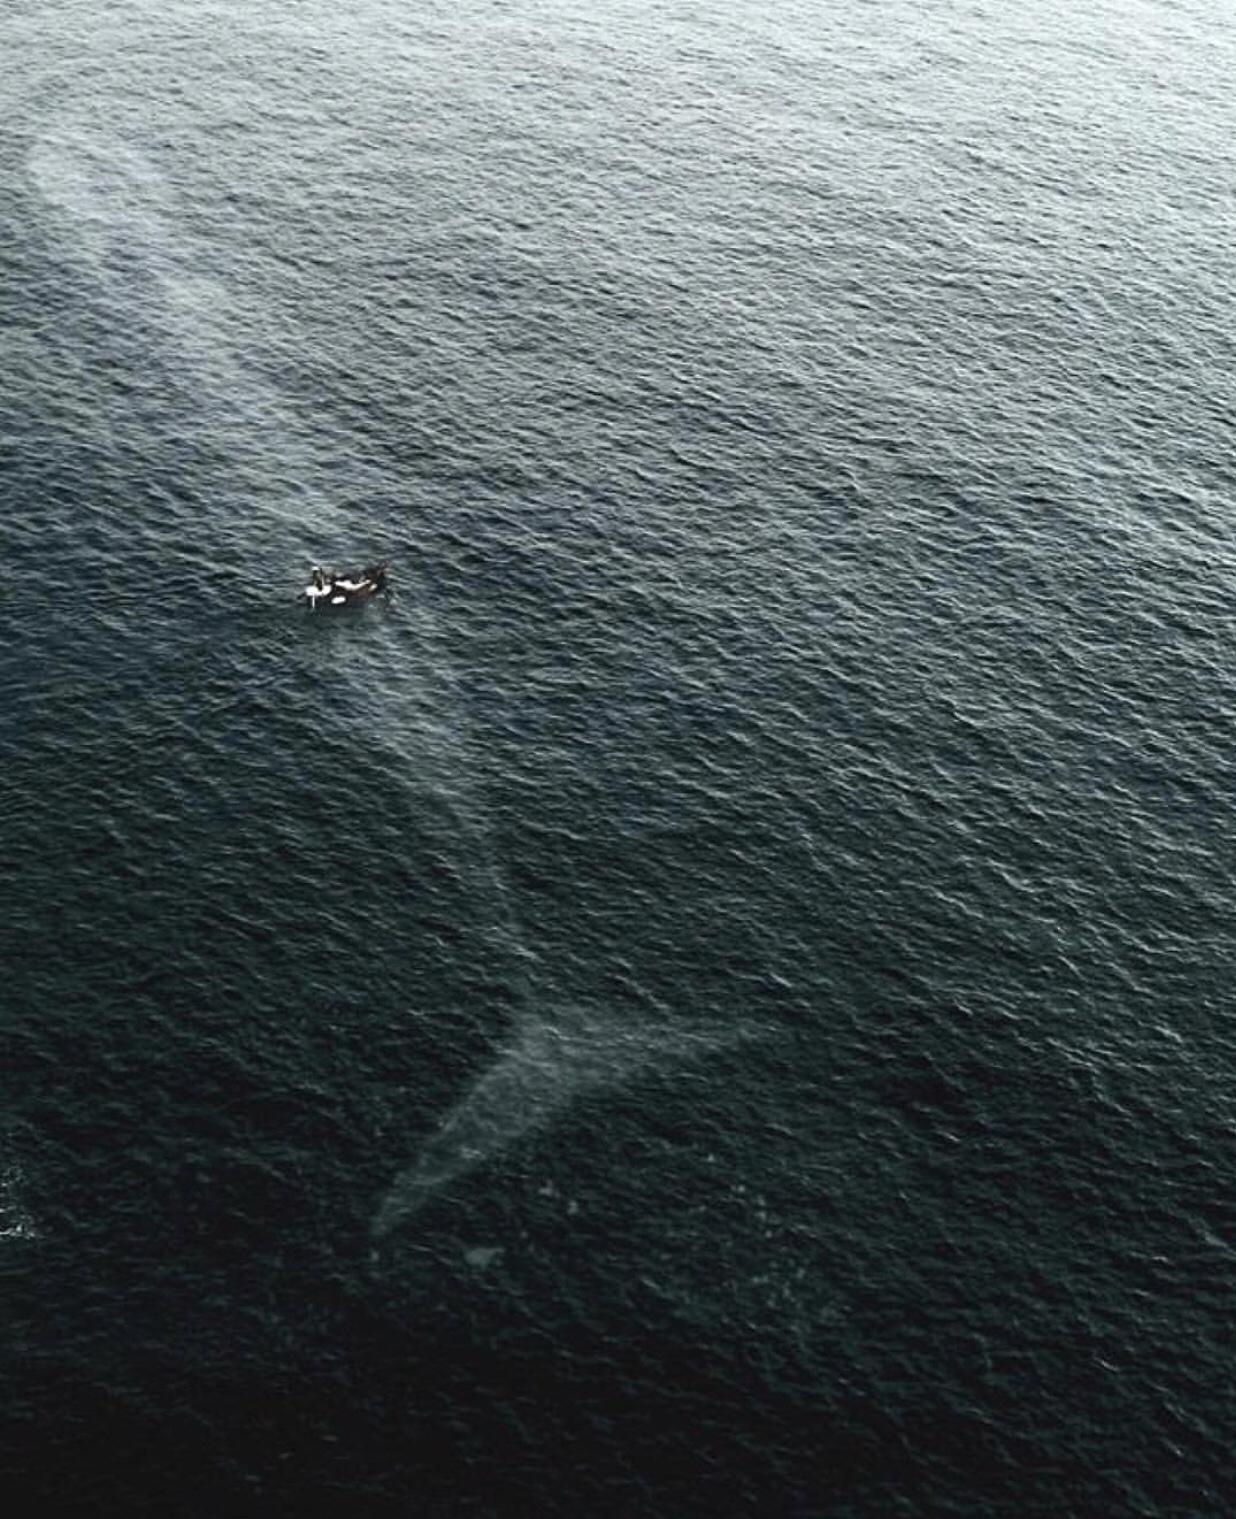 What is the scariest real picture of the ocean or anything in it?